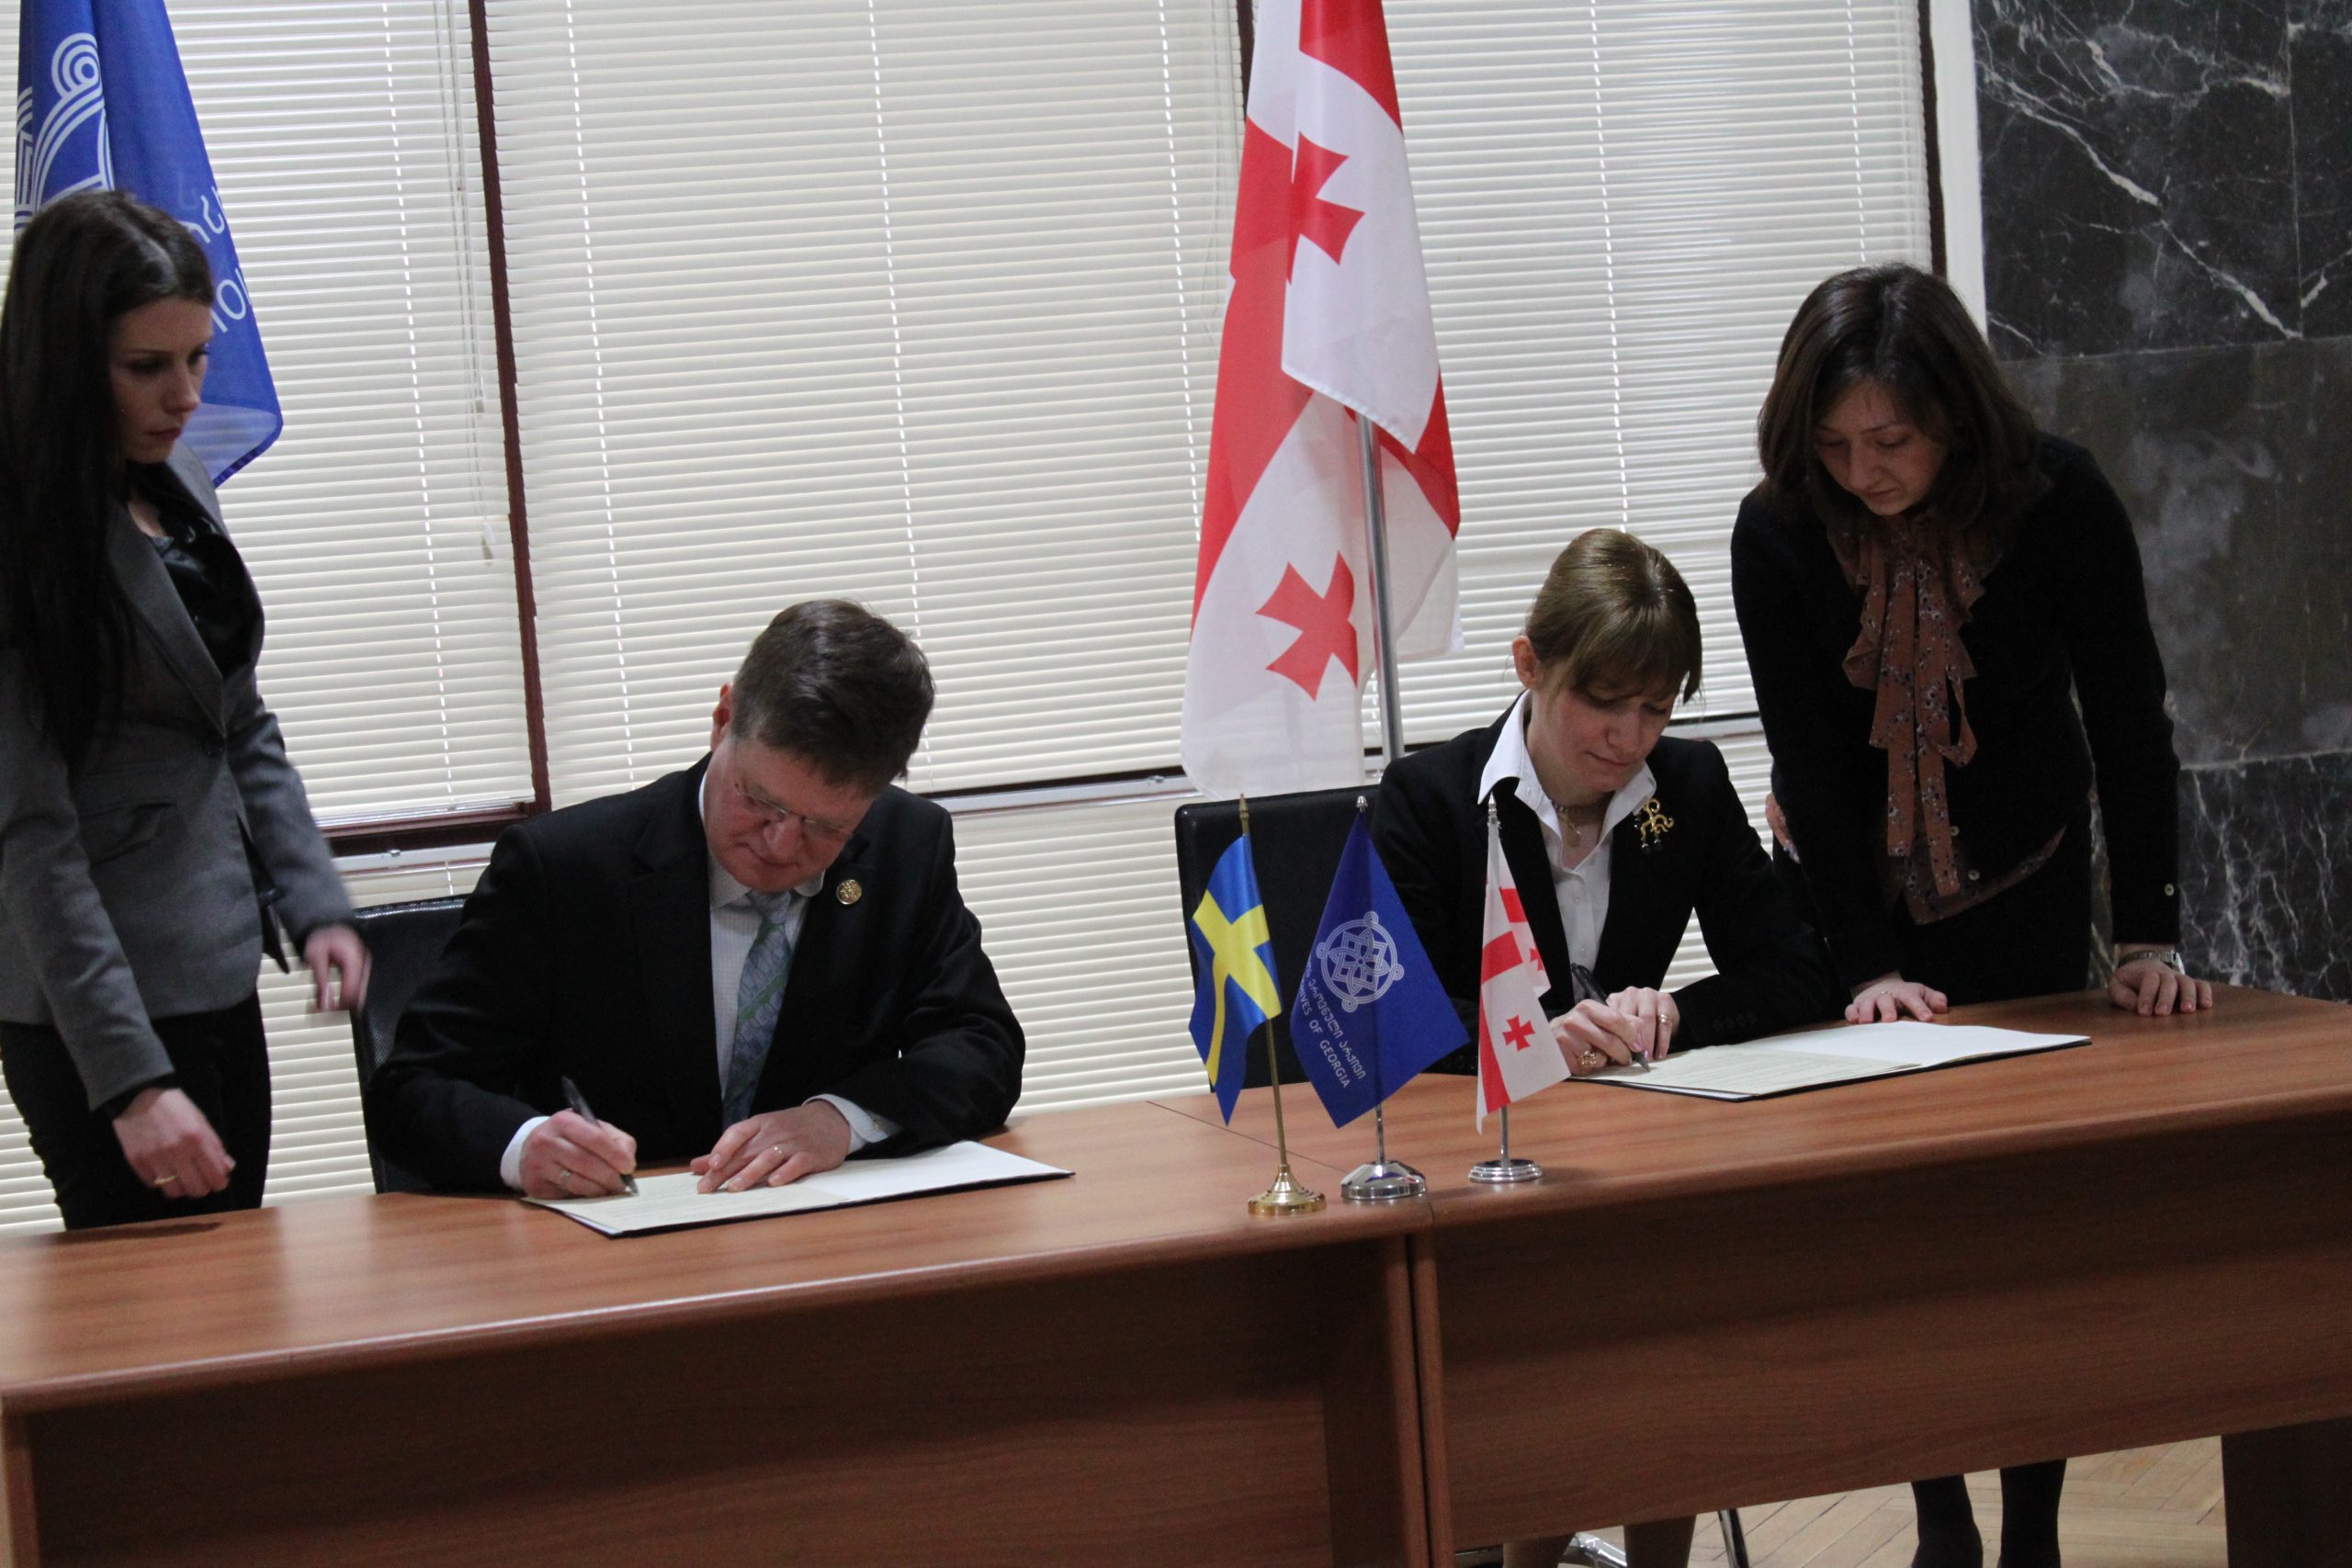 Preliminary Agreement for the Branobel History project is signed in Tbilisi. Mr. Alexander Husebye (left), CEO of Centre for Business History in Stockholm, and Dr. Teona Iashvili (right), Director General of the National Archives of Georgia. Photo: National Archives of Georgia.